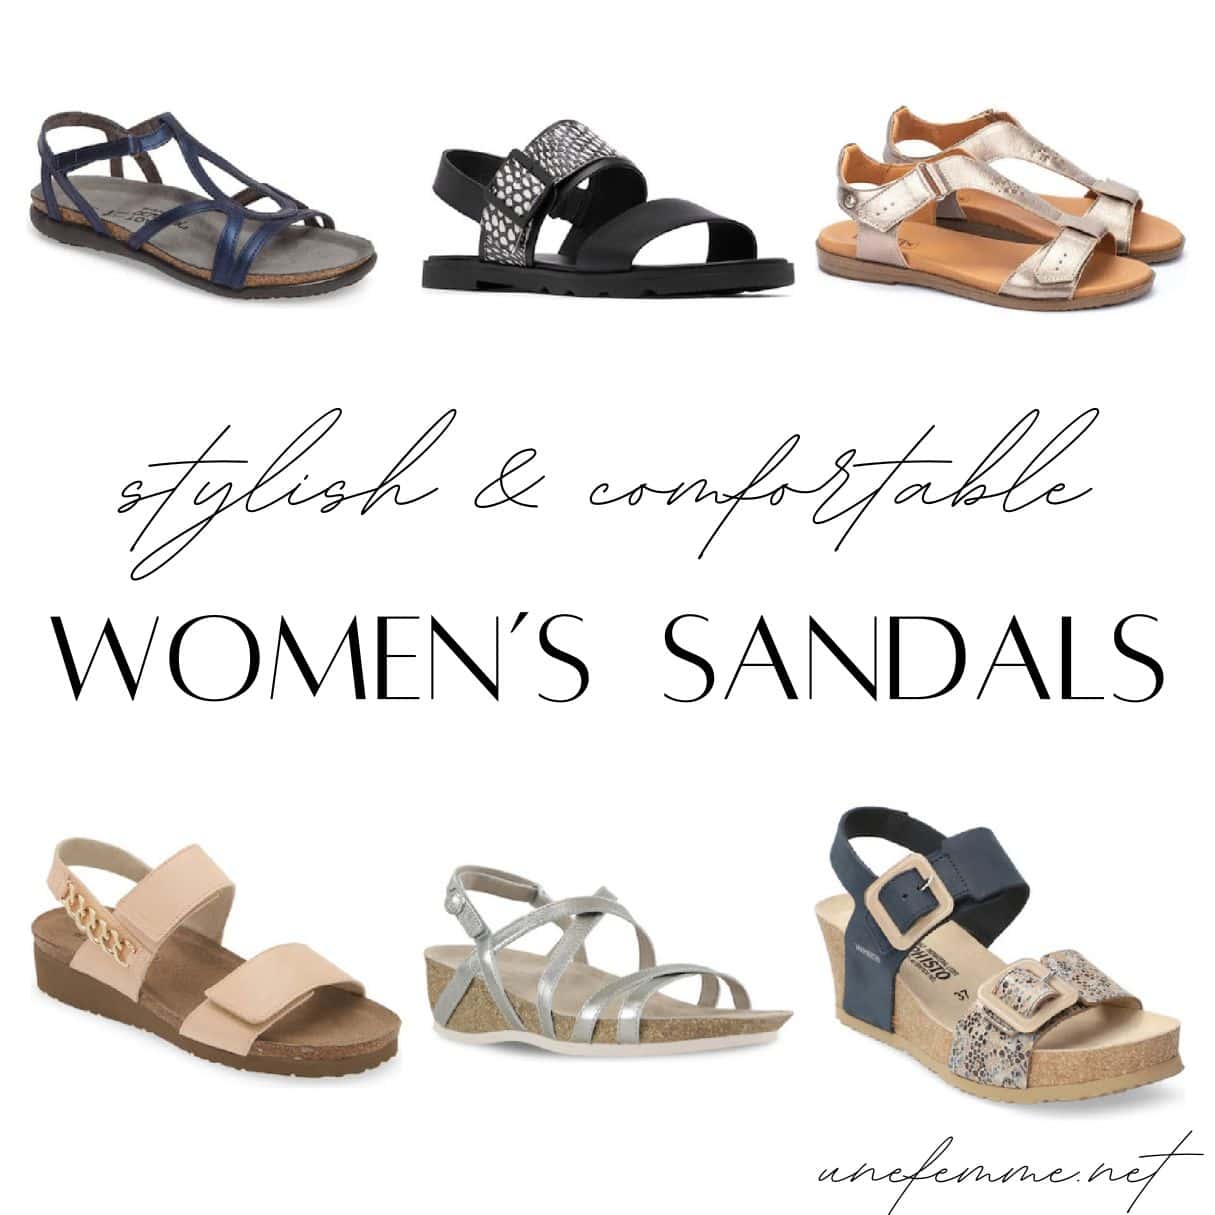 Stylish sandals for women over 50